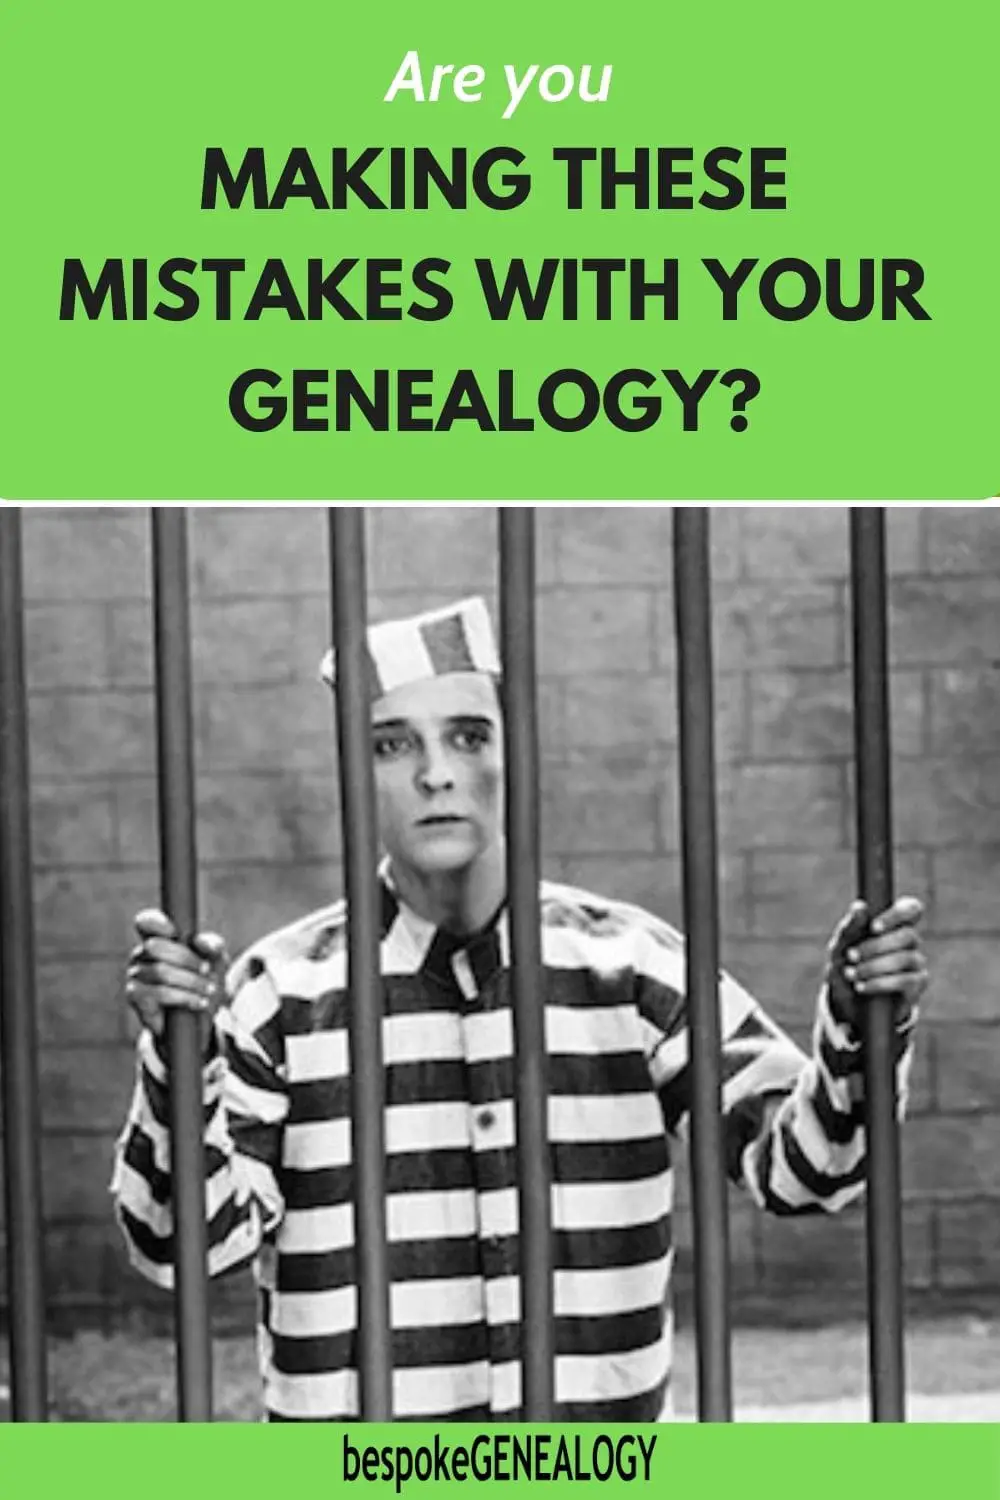 Are you making these mistakes with your genealogy? Vintage photo of a man in striped uniform behind bars.